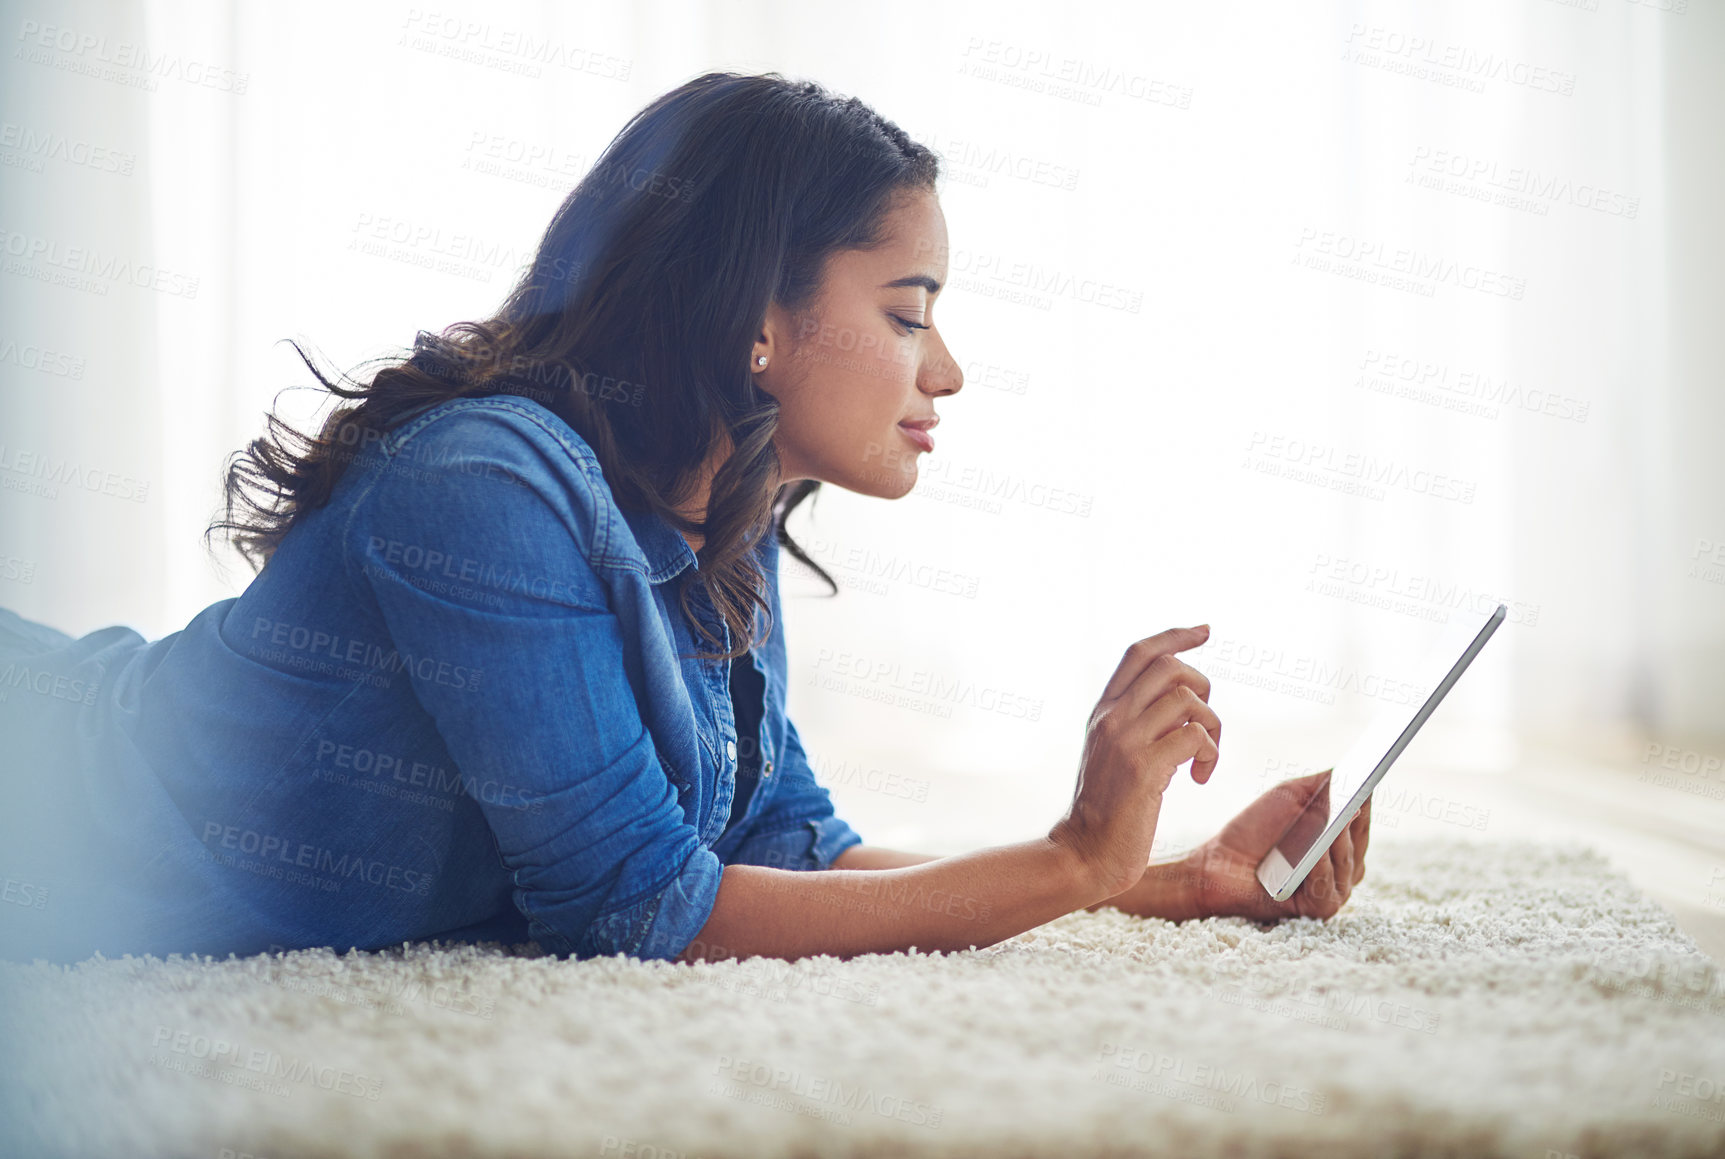 Buy stock photo Shot of a young woman browsing the web on her tablet at home